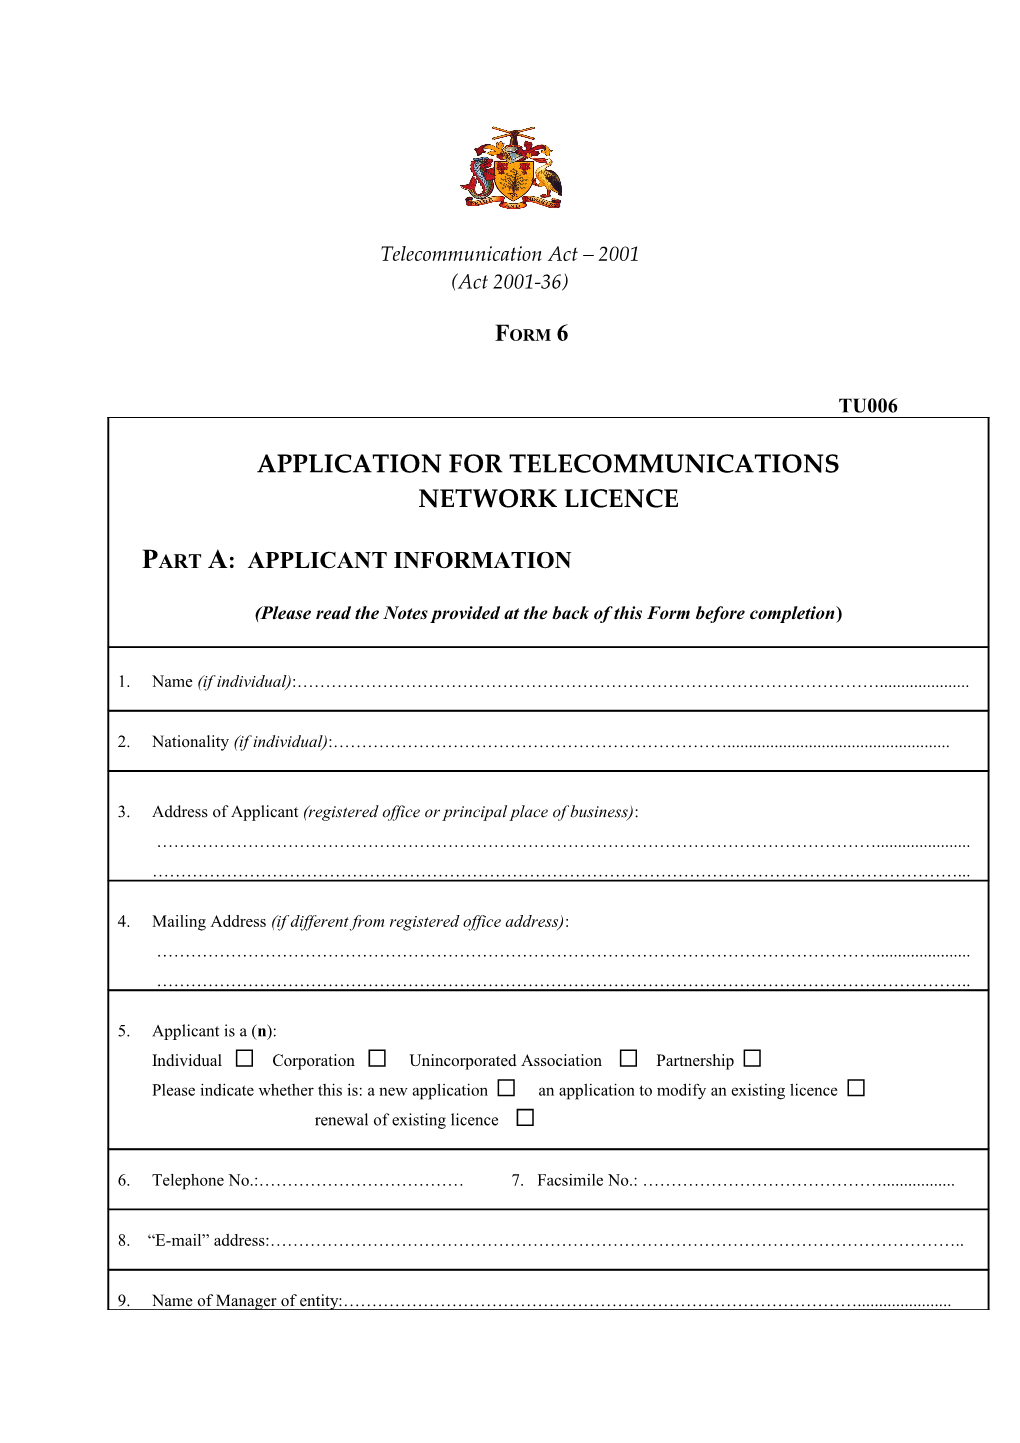 Application for Telecommunications